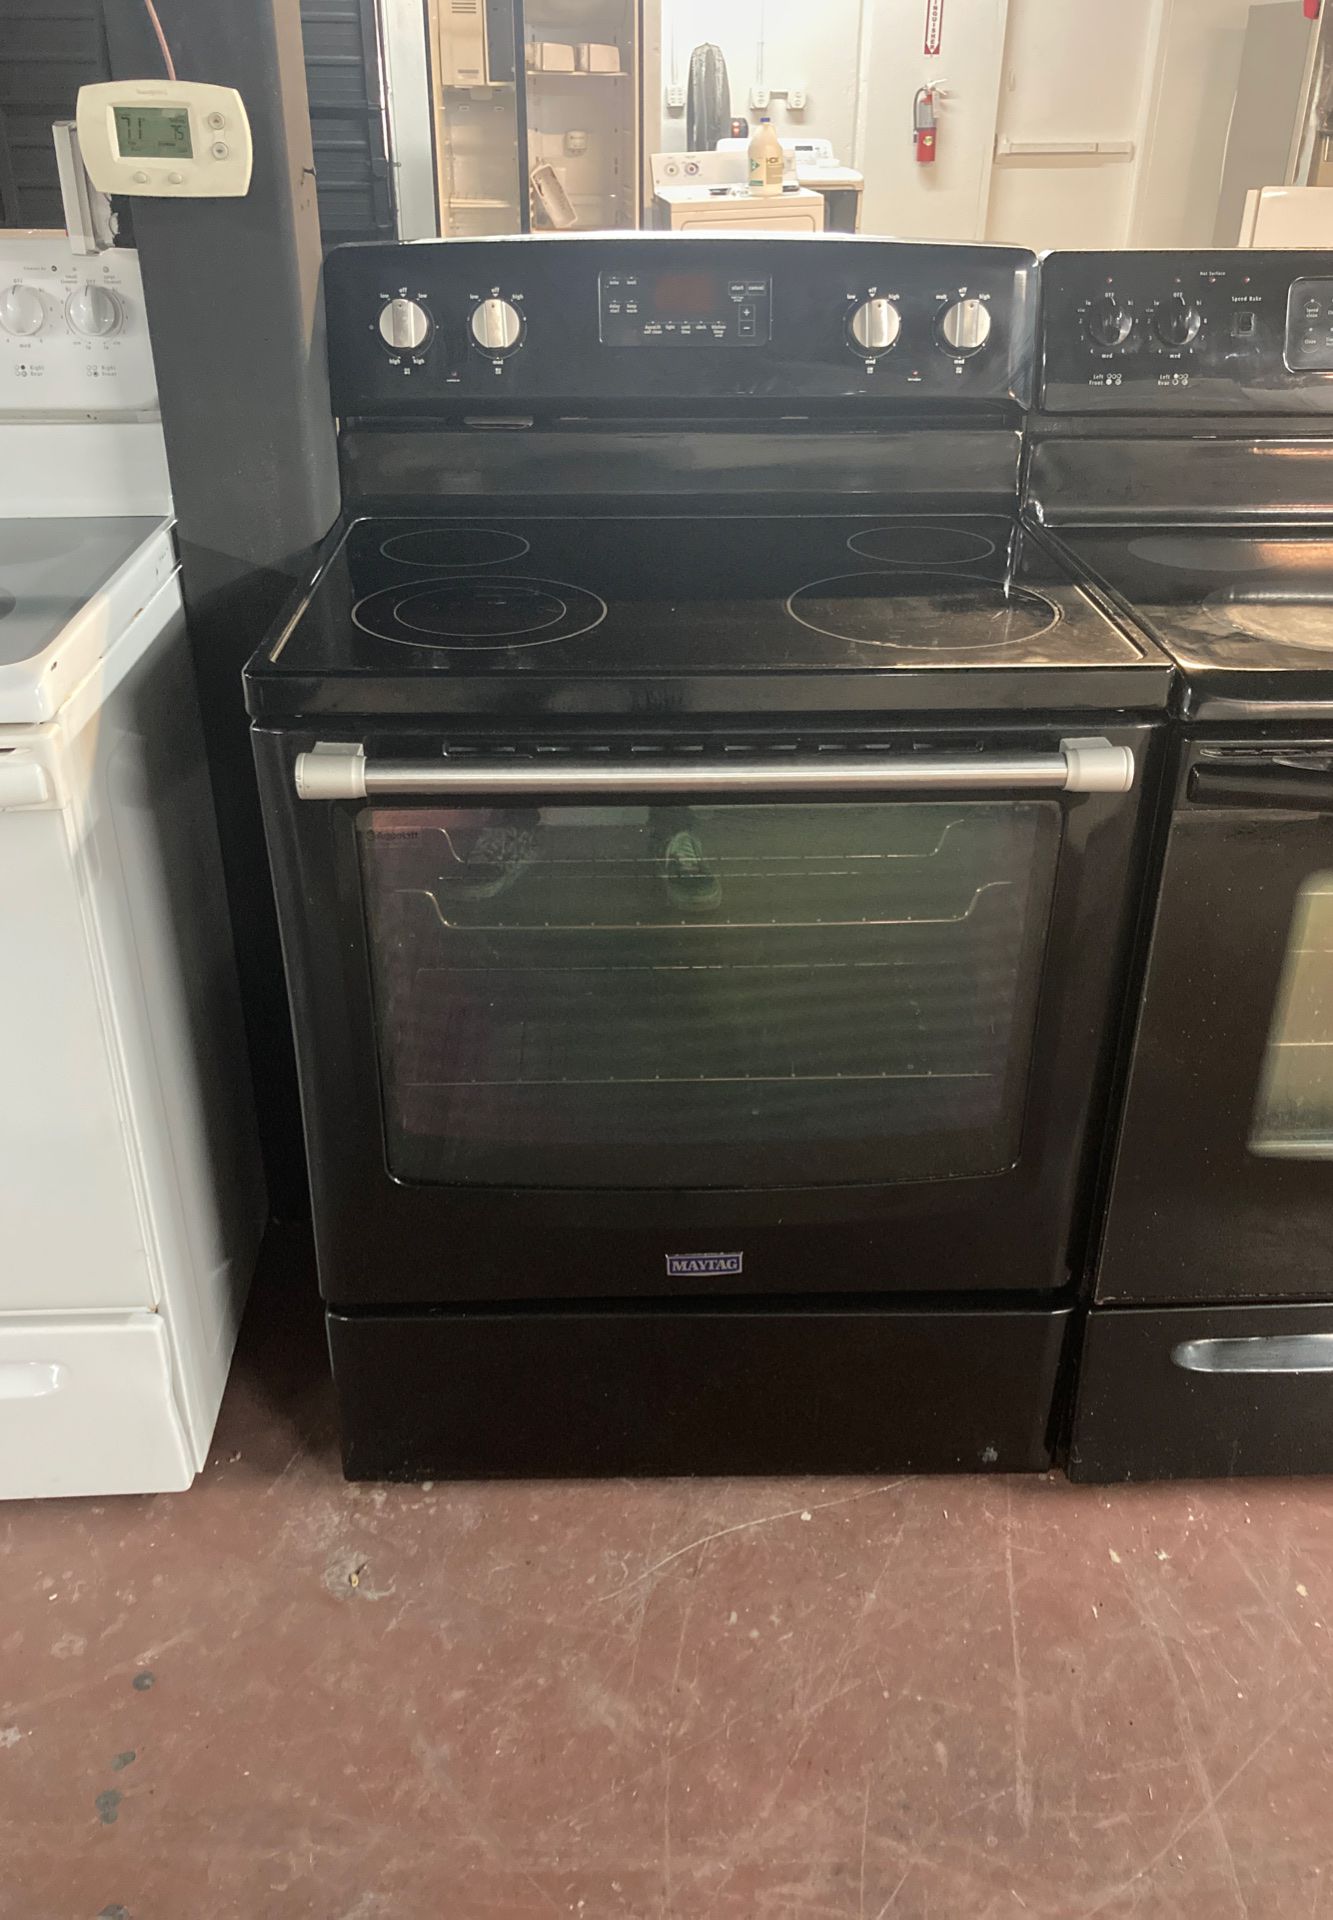 Maytag glass top stove aqua lift self cleaning oven!